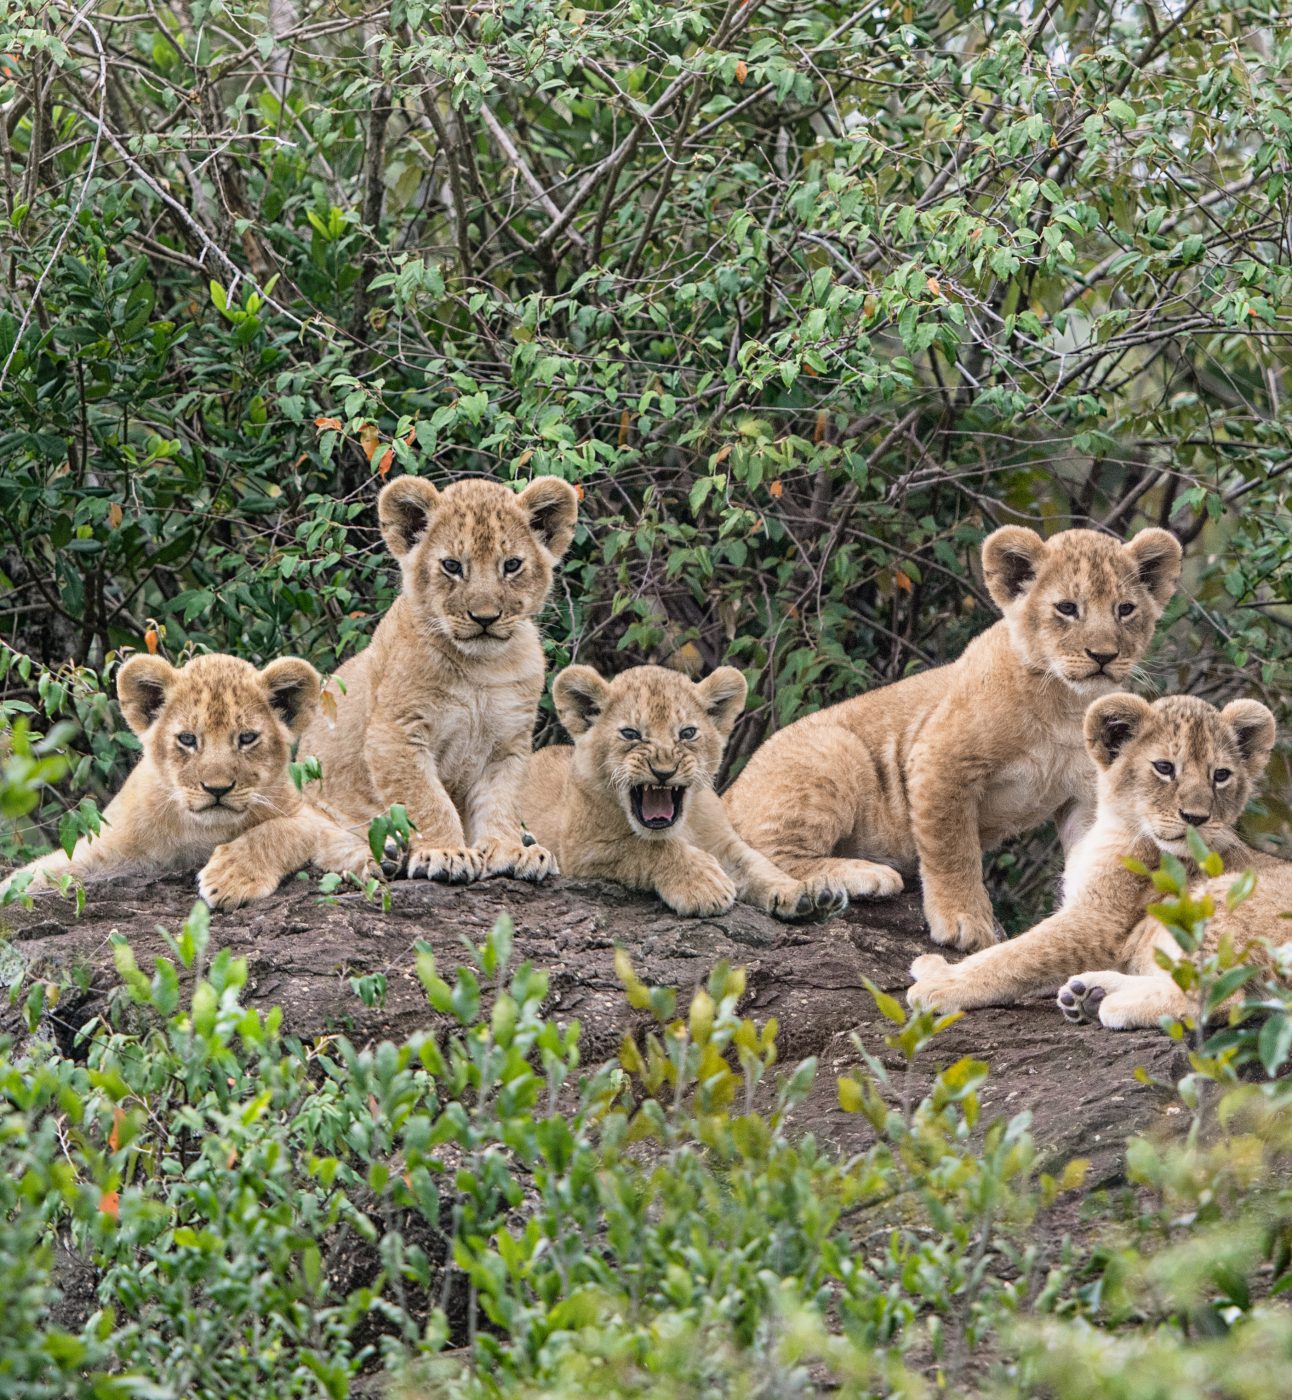 A group of five lion cubs, the one in the middle with tis mouth wide open